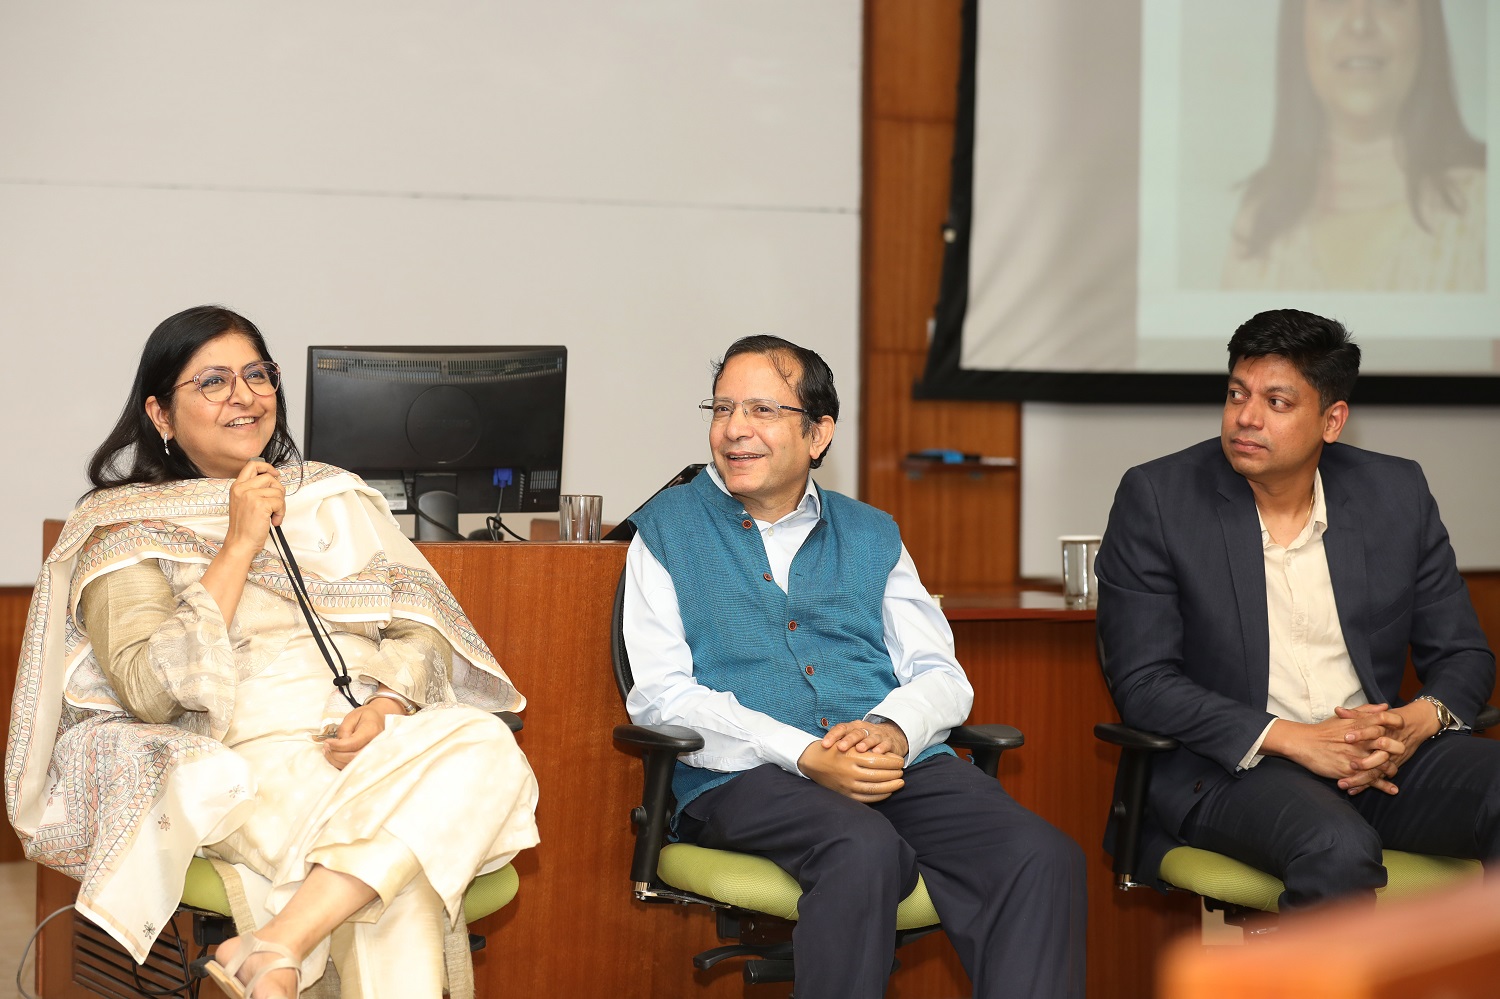 Ms Suchita Sharma, Assurance Partner in Price Waterhouse; Prof. Gopal P Mahapatra, Faculty from the OB & HRM area, IIMB, and Mr Govindraj MK, Vice President Human Resources, Flipkart, at the panel discussion hosted as part of the course, ‘Managing Career Success and Transition’ on 8th March 2023, at IIMB.